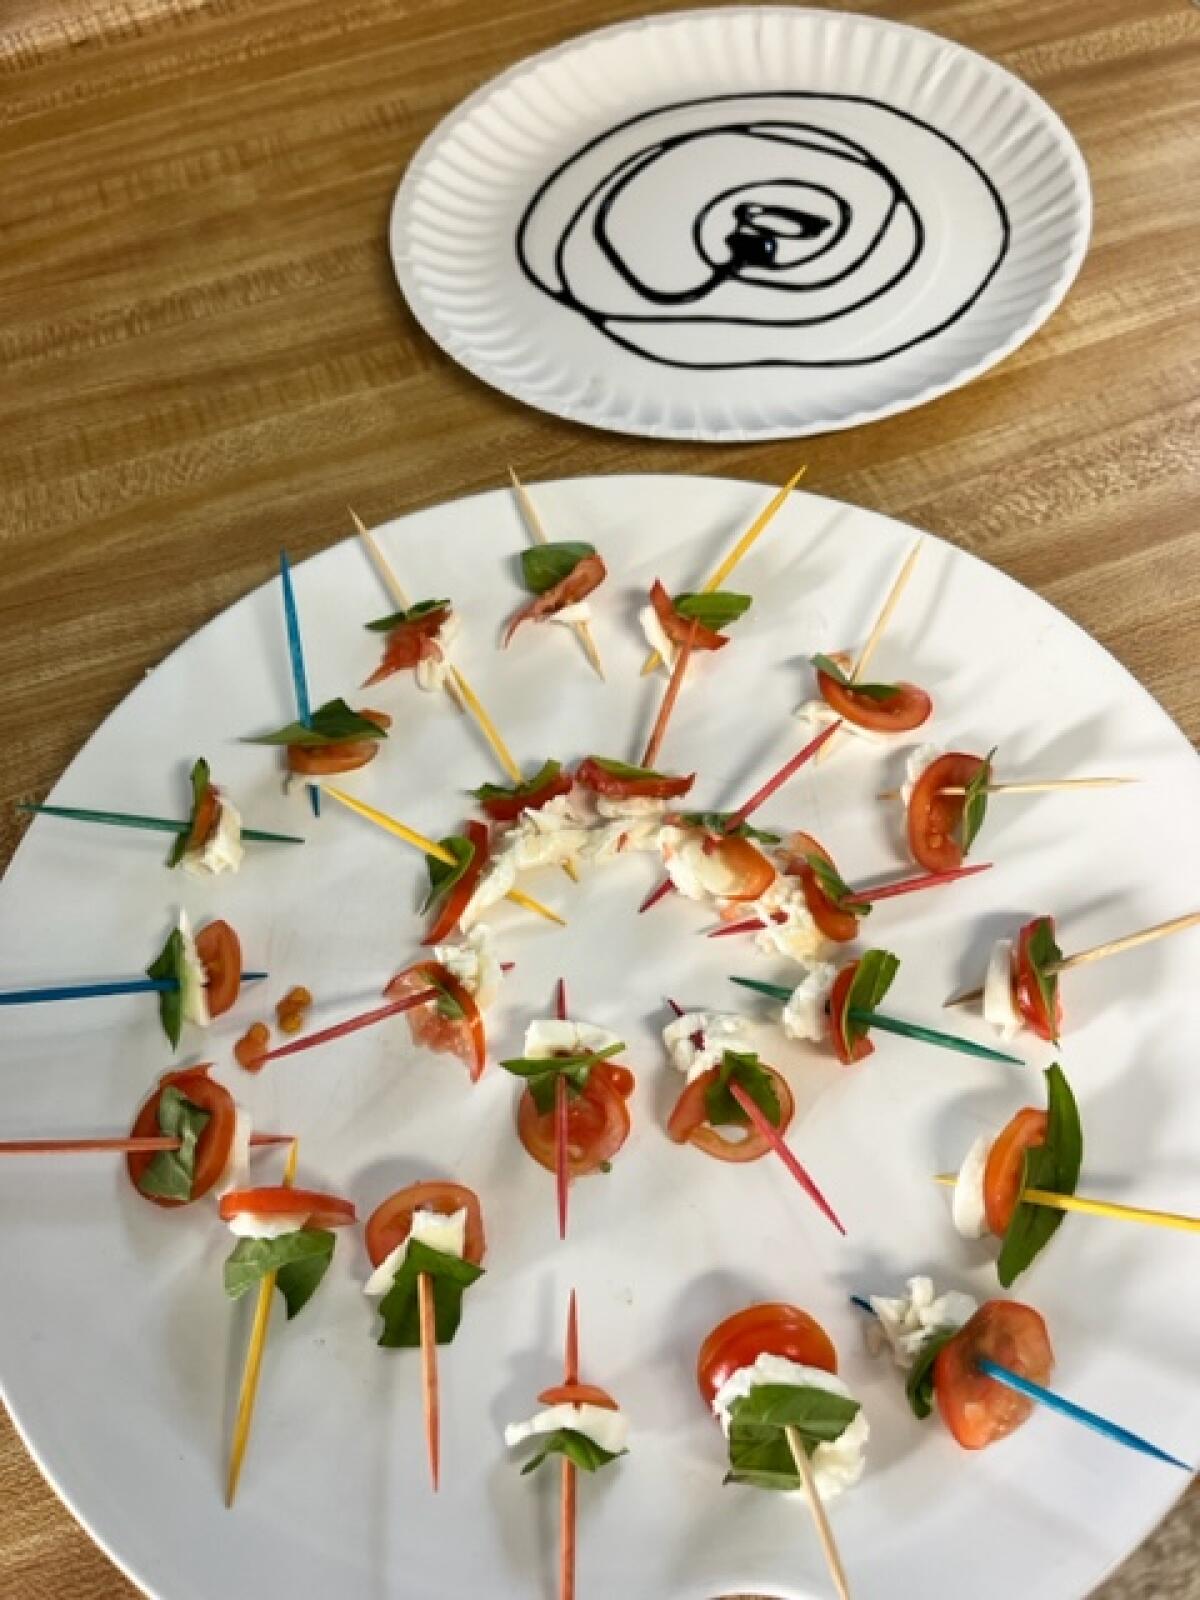 Students at Kinetic Academy enjoyed caprese salad bites over the summer, made with vegetables from gardens on campus.